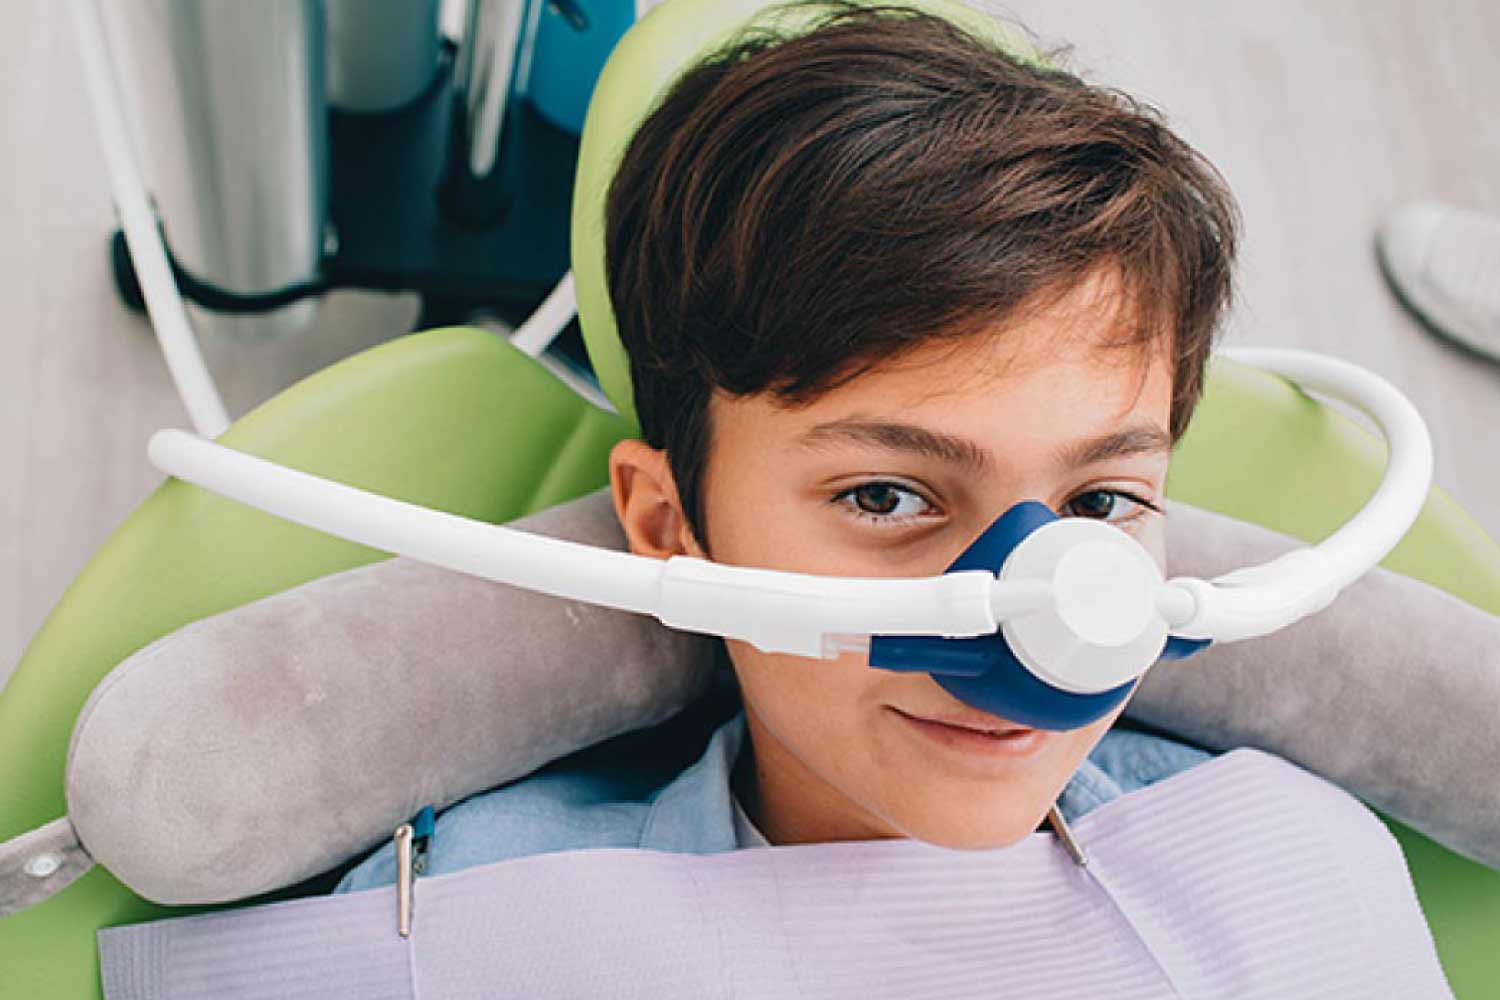 Young boy in the dental chair with a mask dispensing nitrous oxide dental sedation.